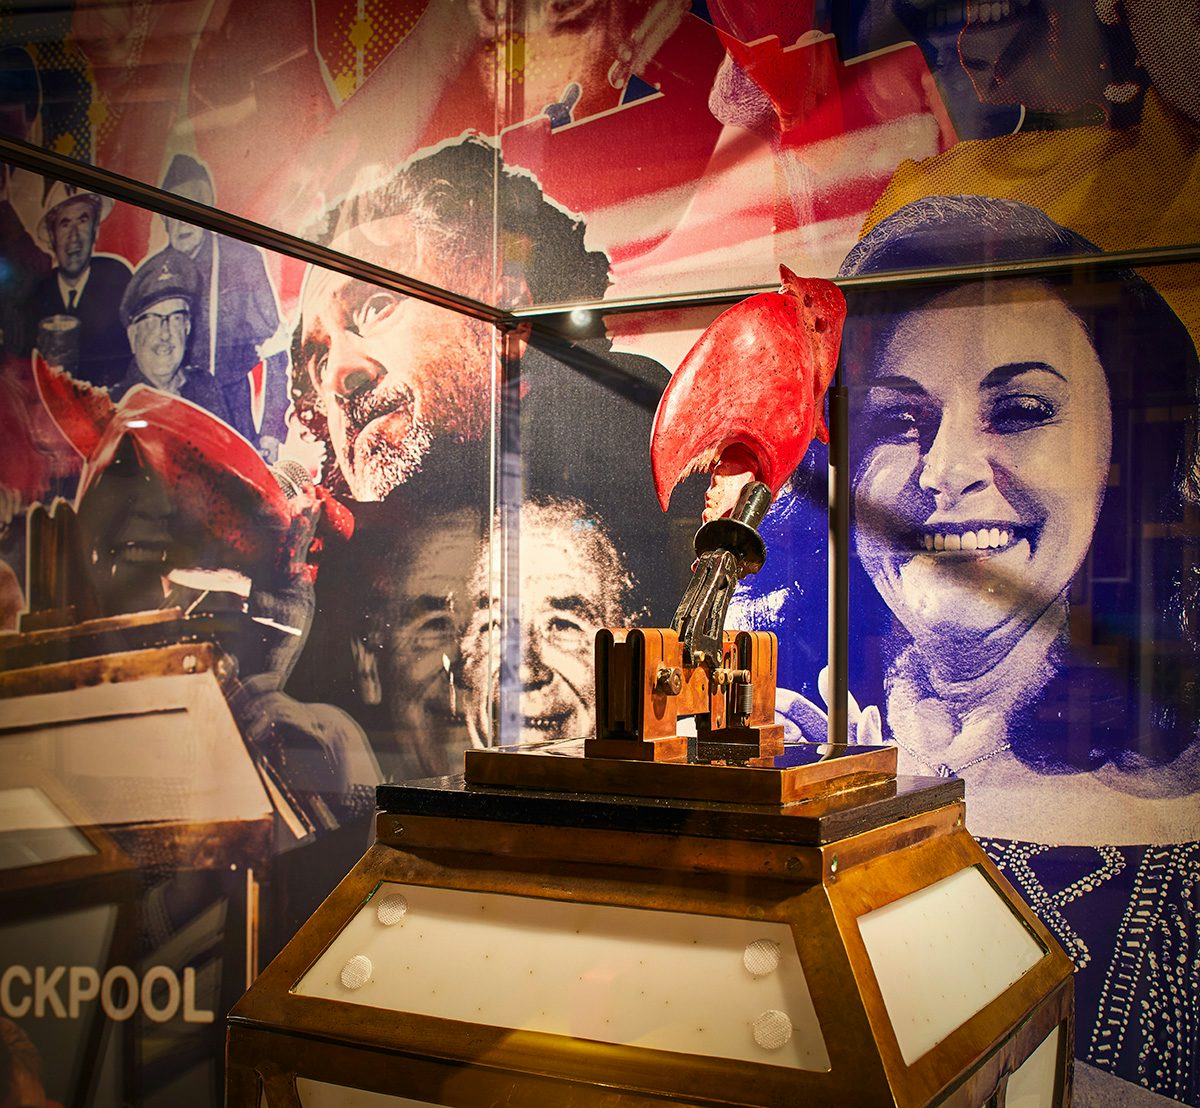 Photo showing the exhibition design for the Showtown museum in Blackpool